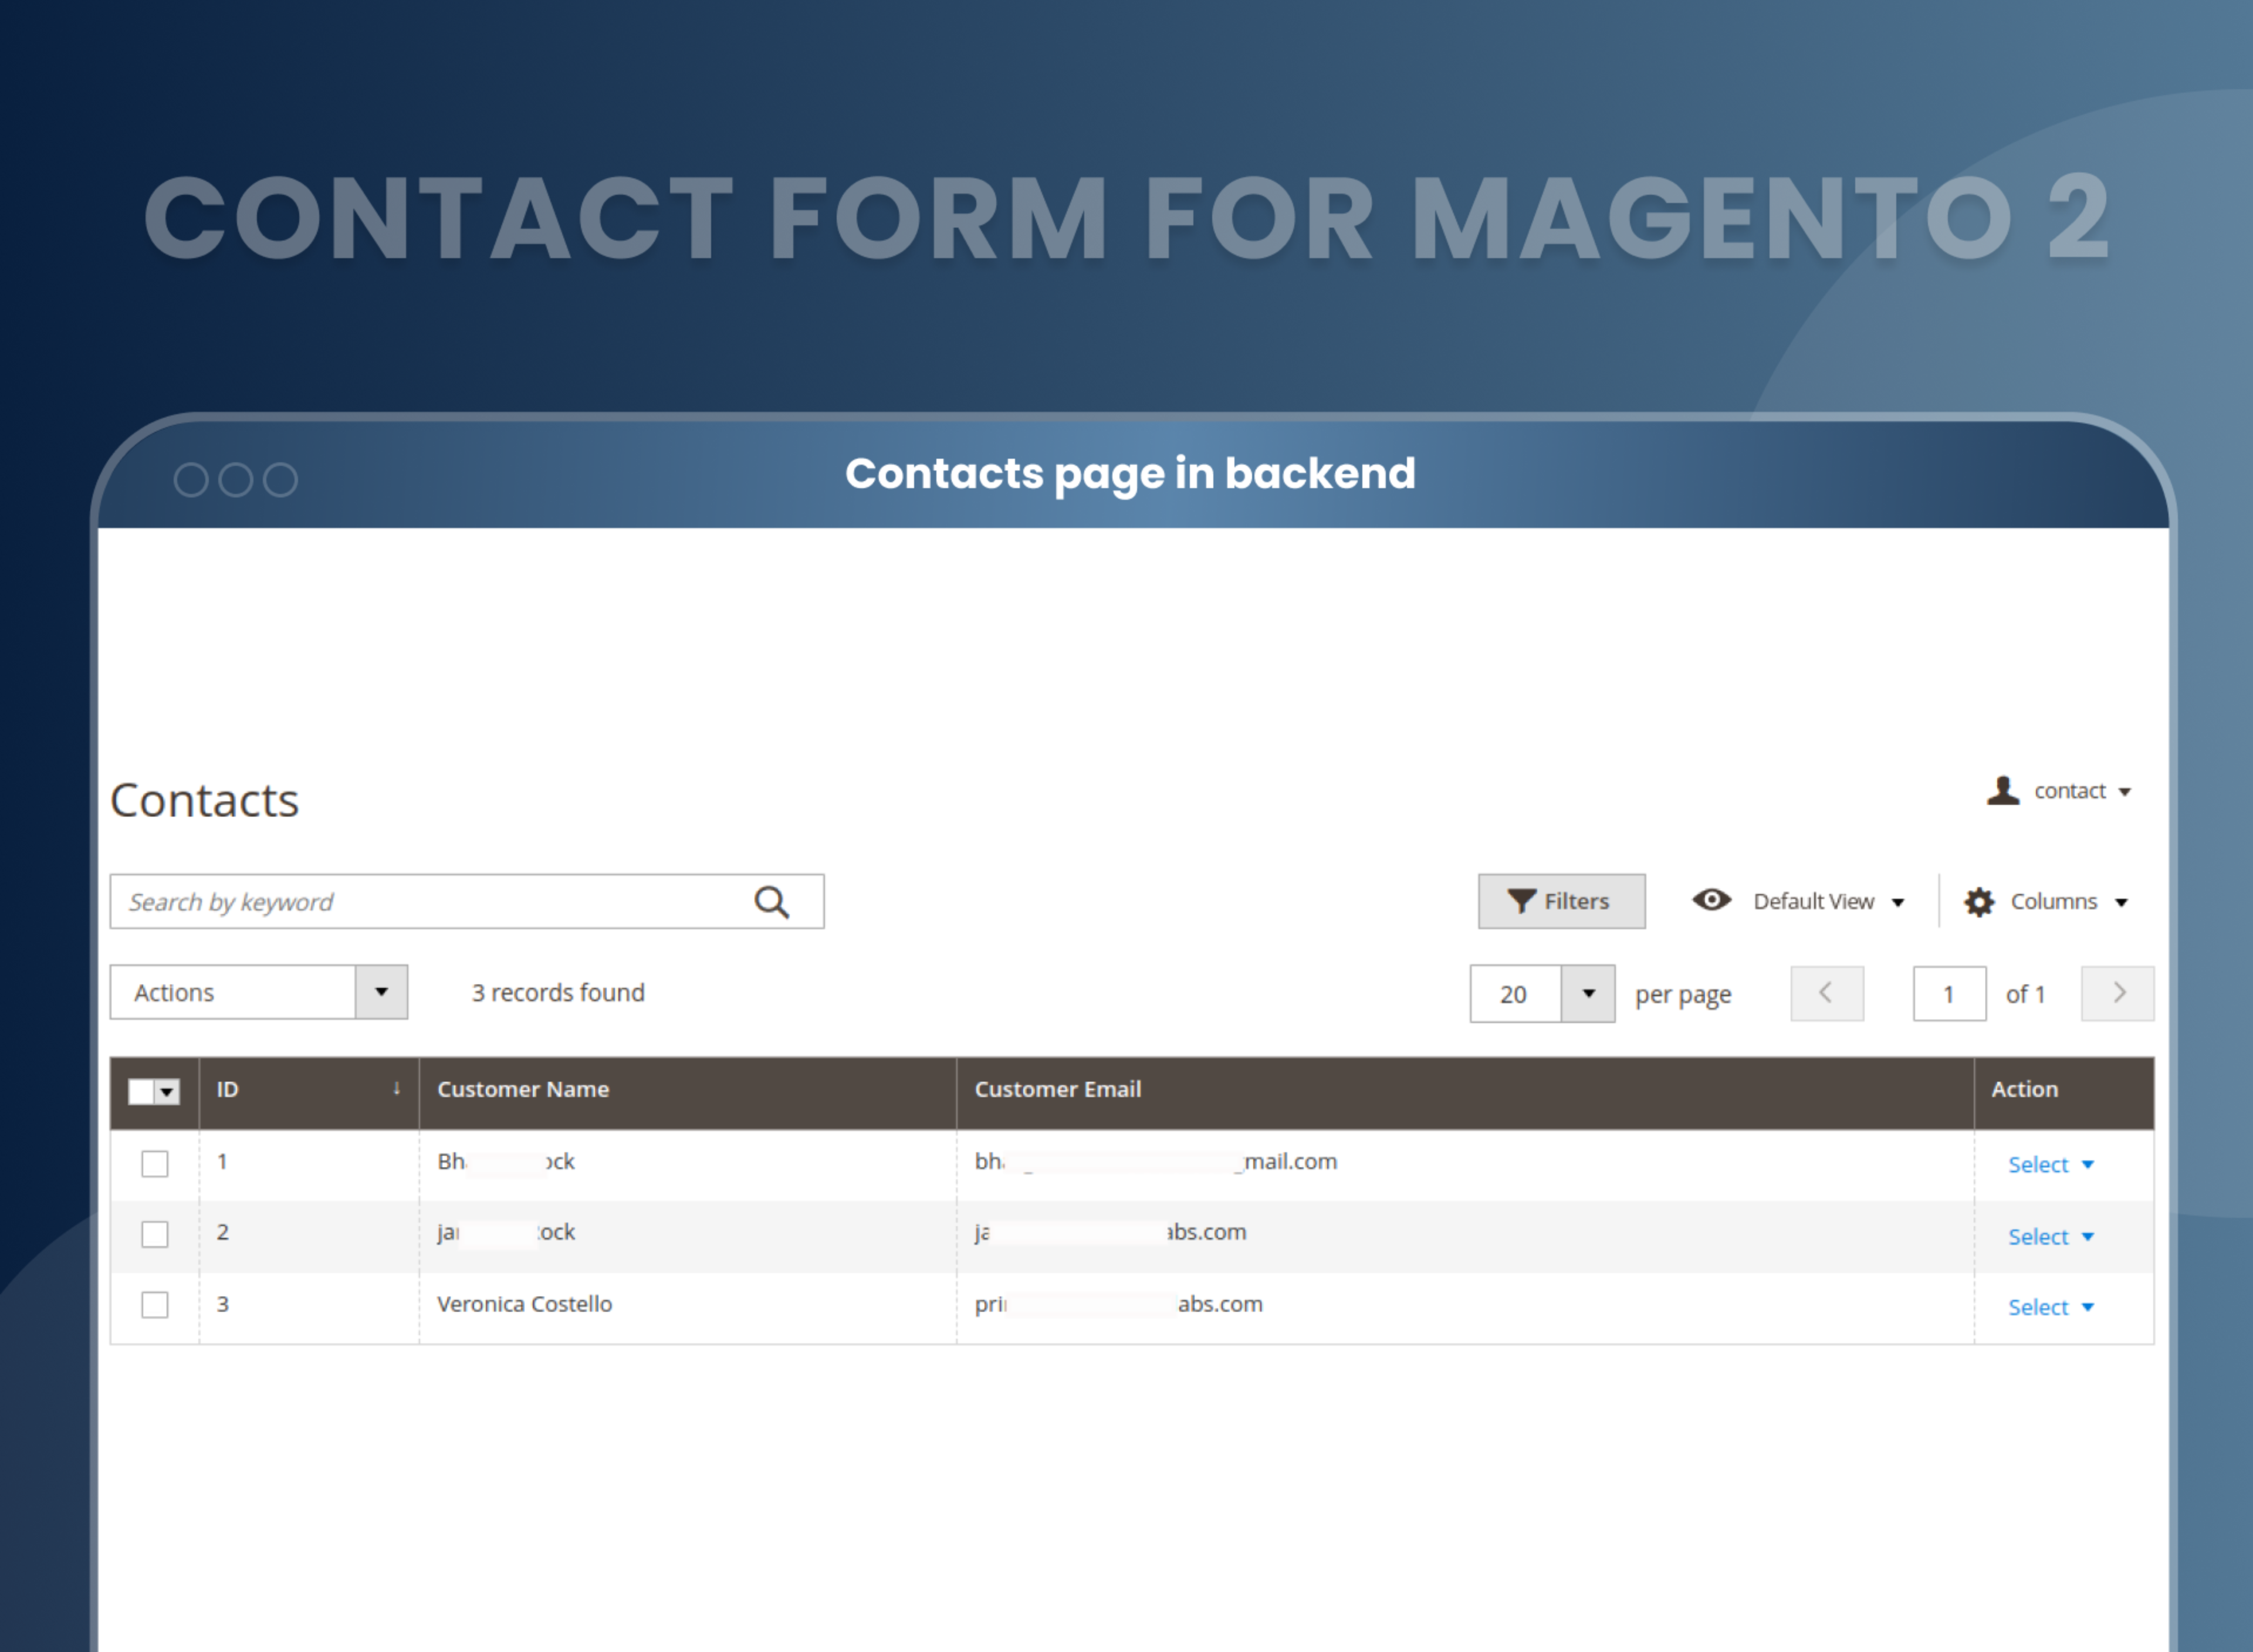 Contacts page in backend